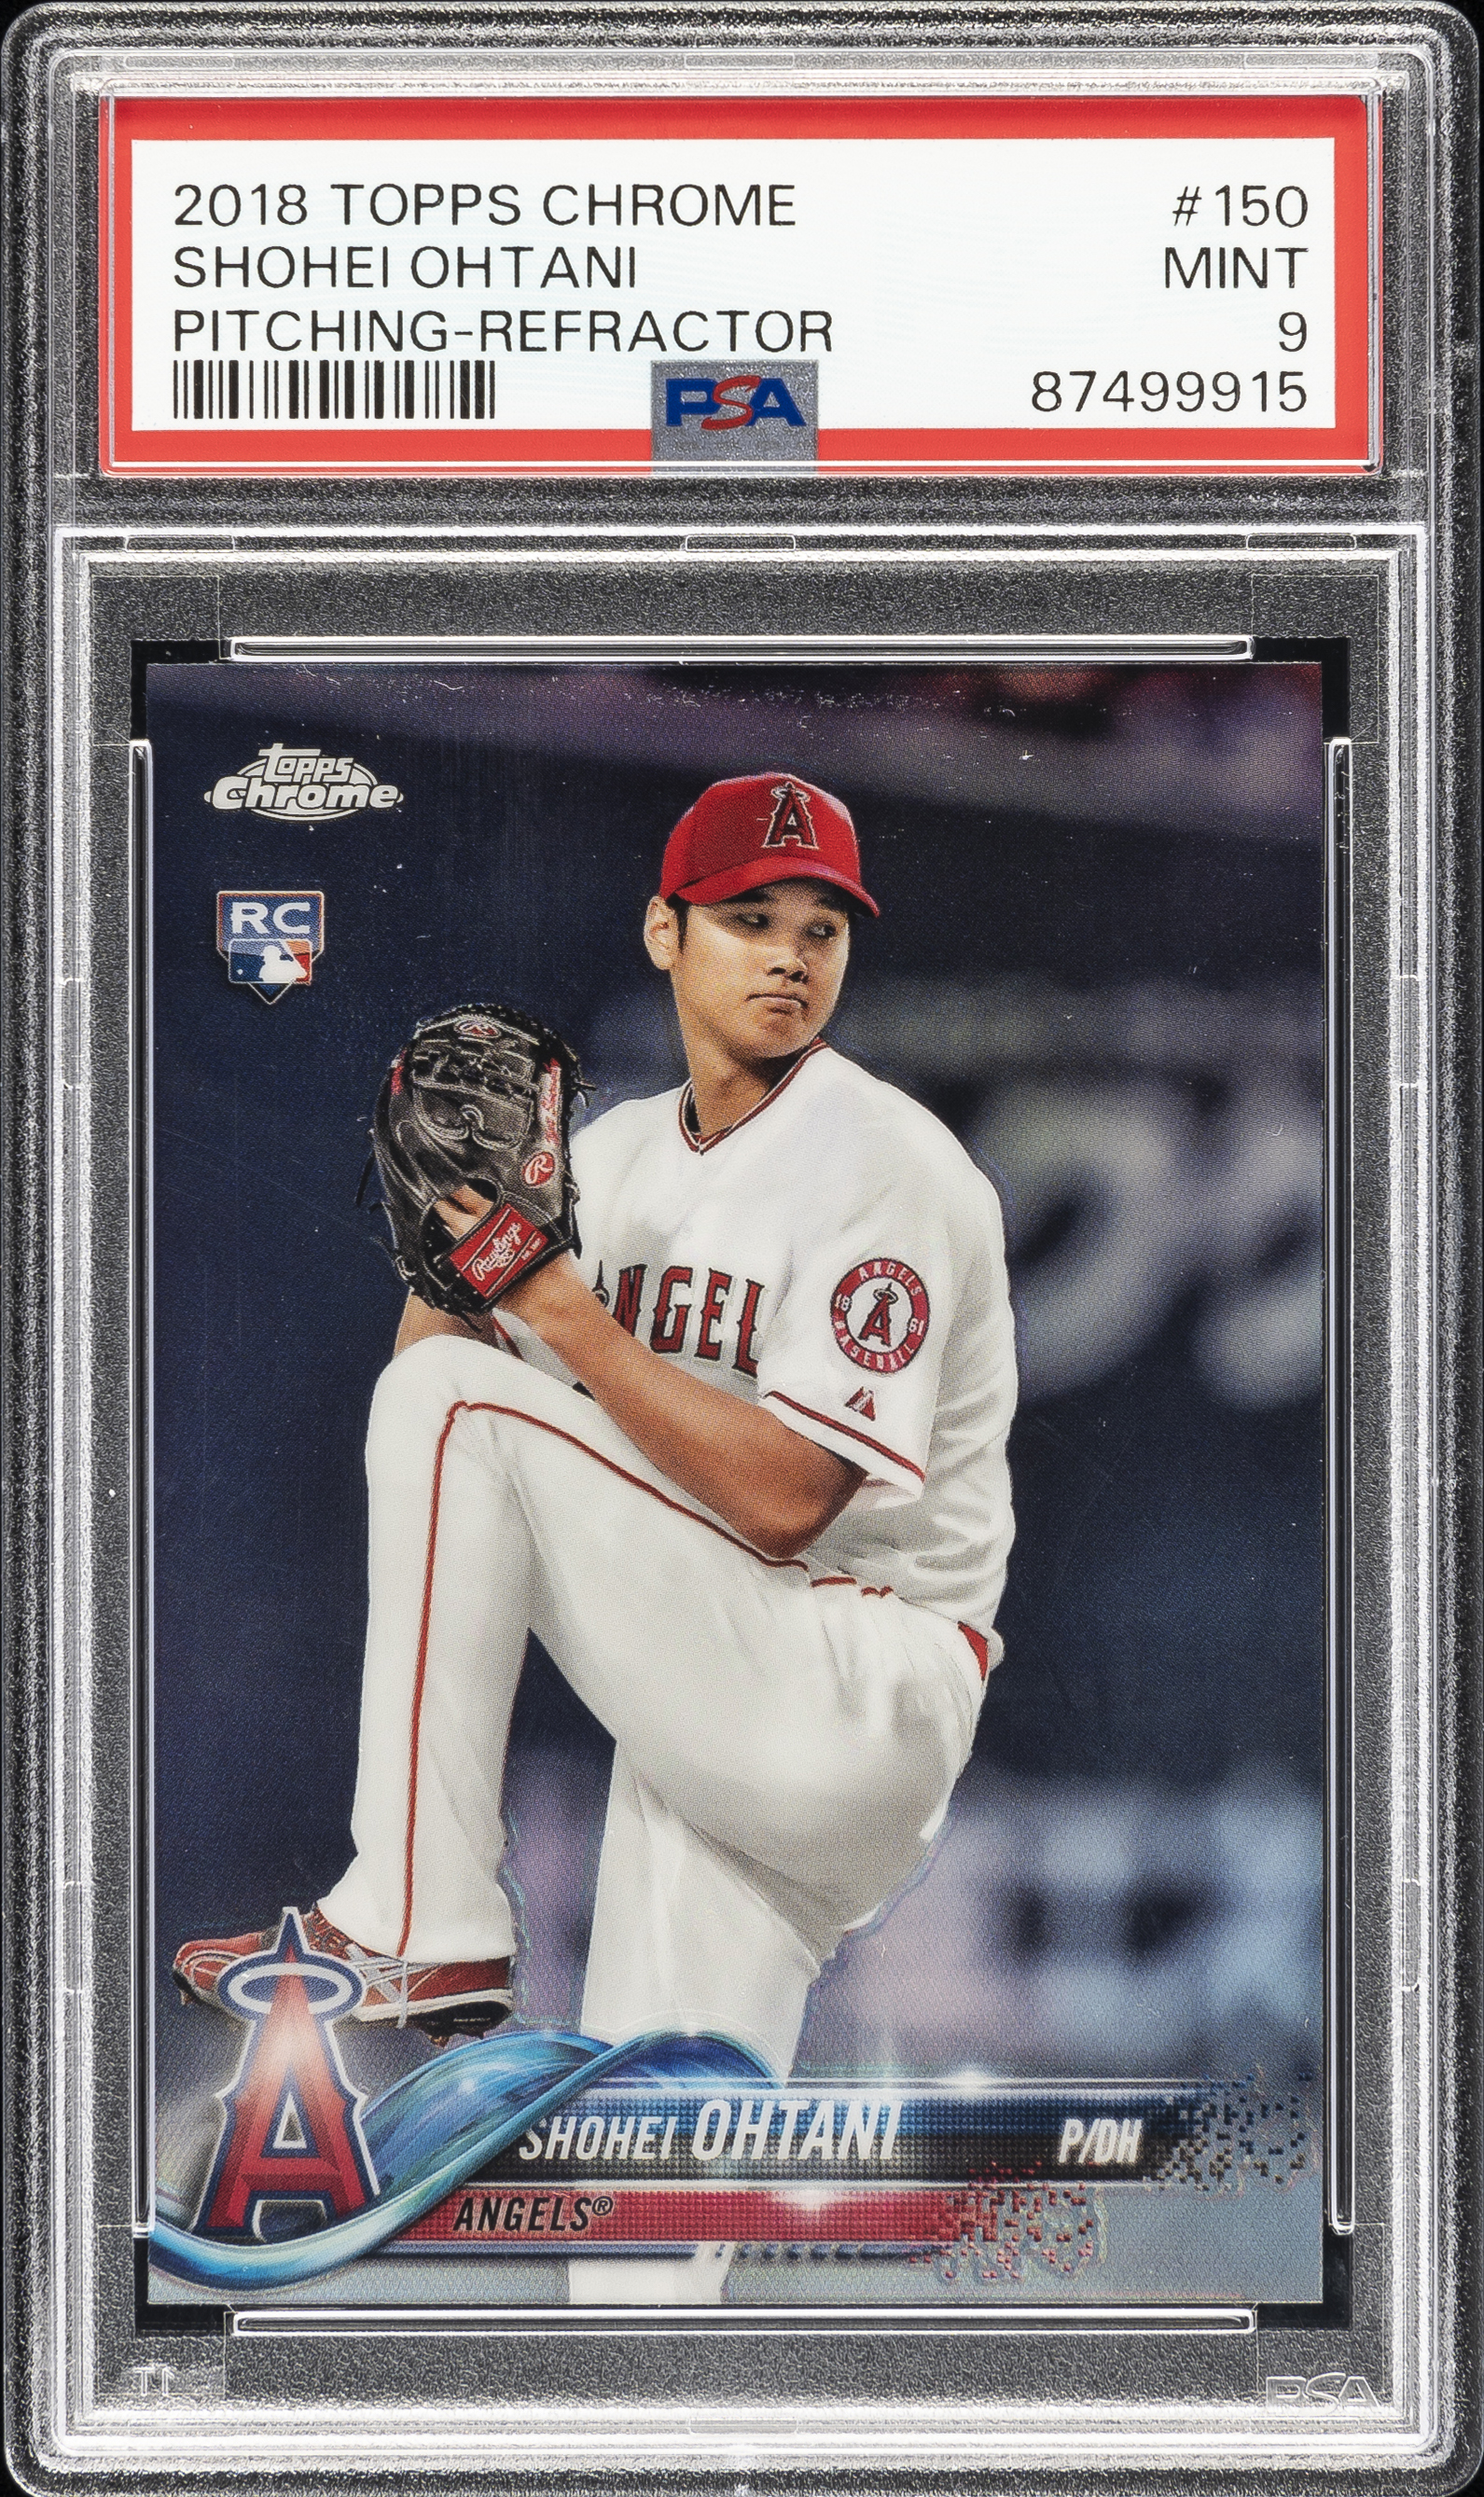 2018 Topps Chrome Pitching-Refractor #150 Shohei Ohtani Rookie Card – PSA MINT 9